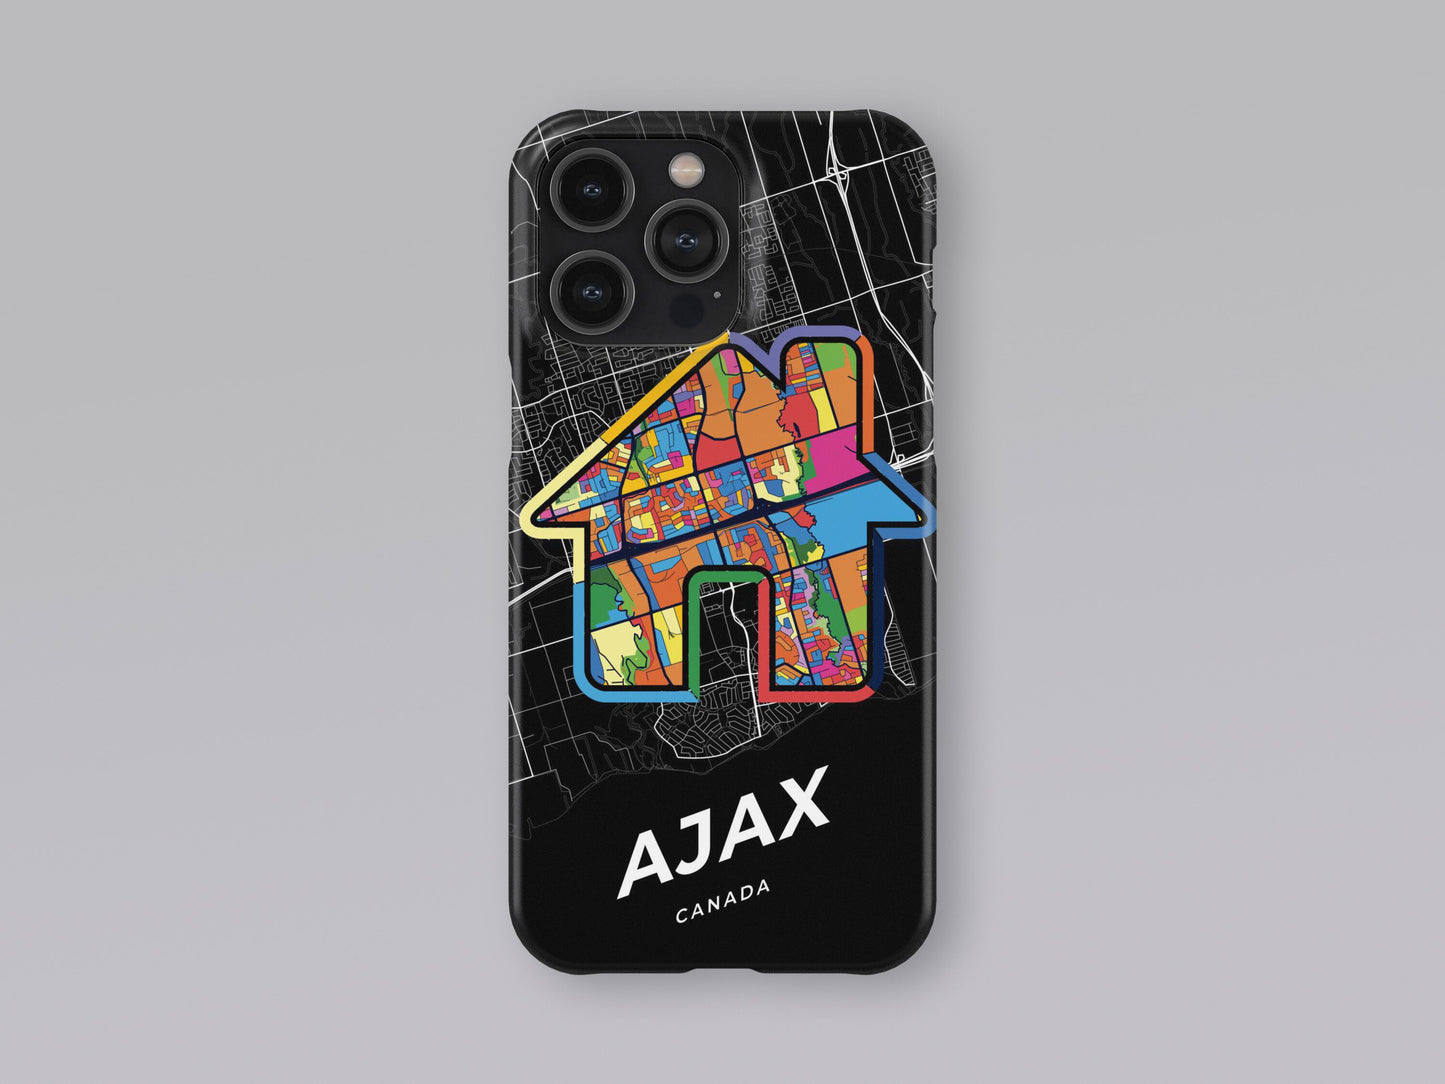 Ajax Canada slim phone case with colorful icon. Birthday, wedding or housewarming gift. Couple match cases. 3